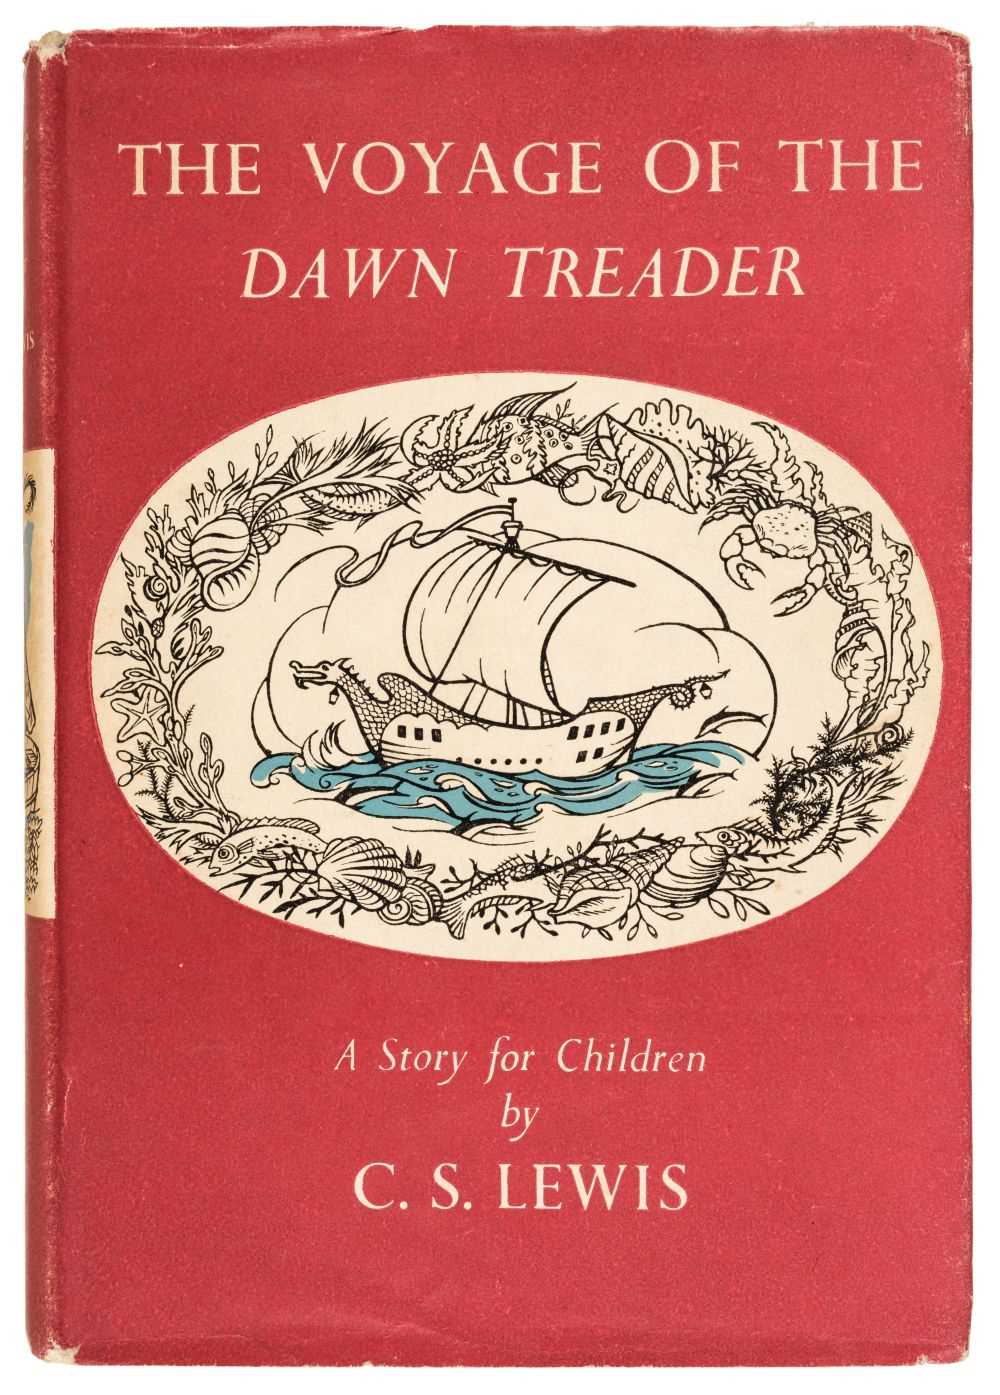 Lot 843 - Lewis (C.S.) The Voyage of the Dawn Treader, 1st edition, 1952